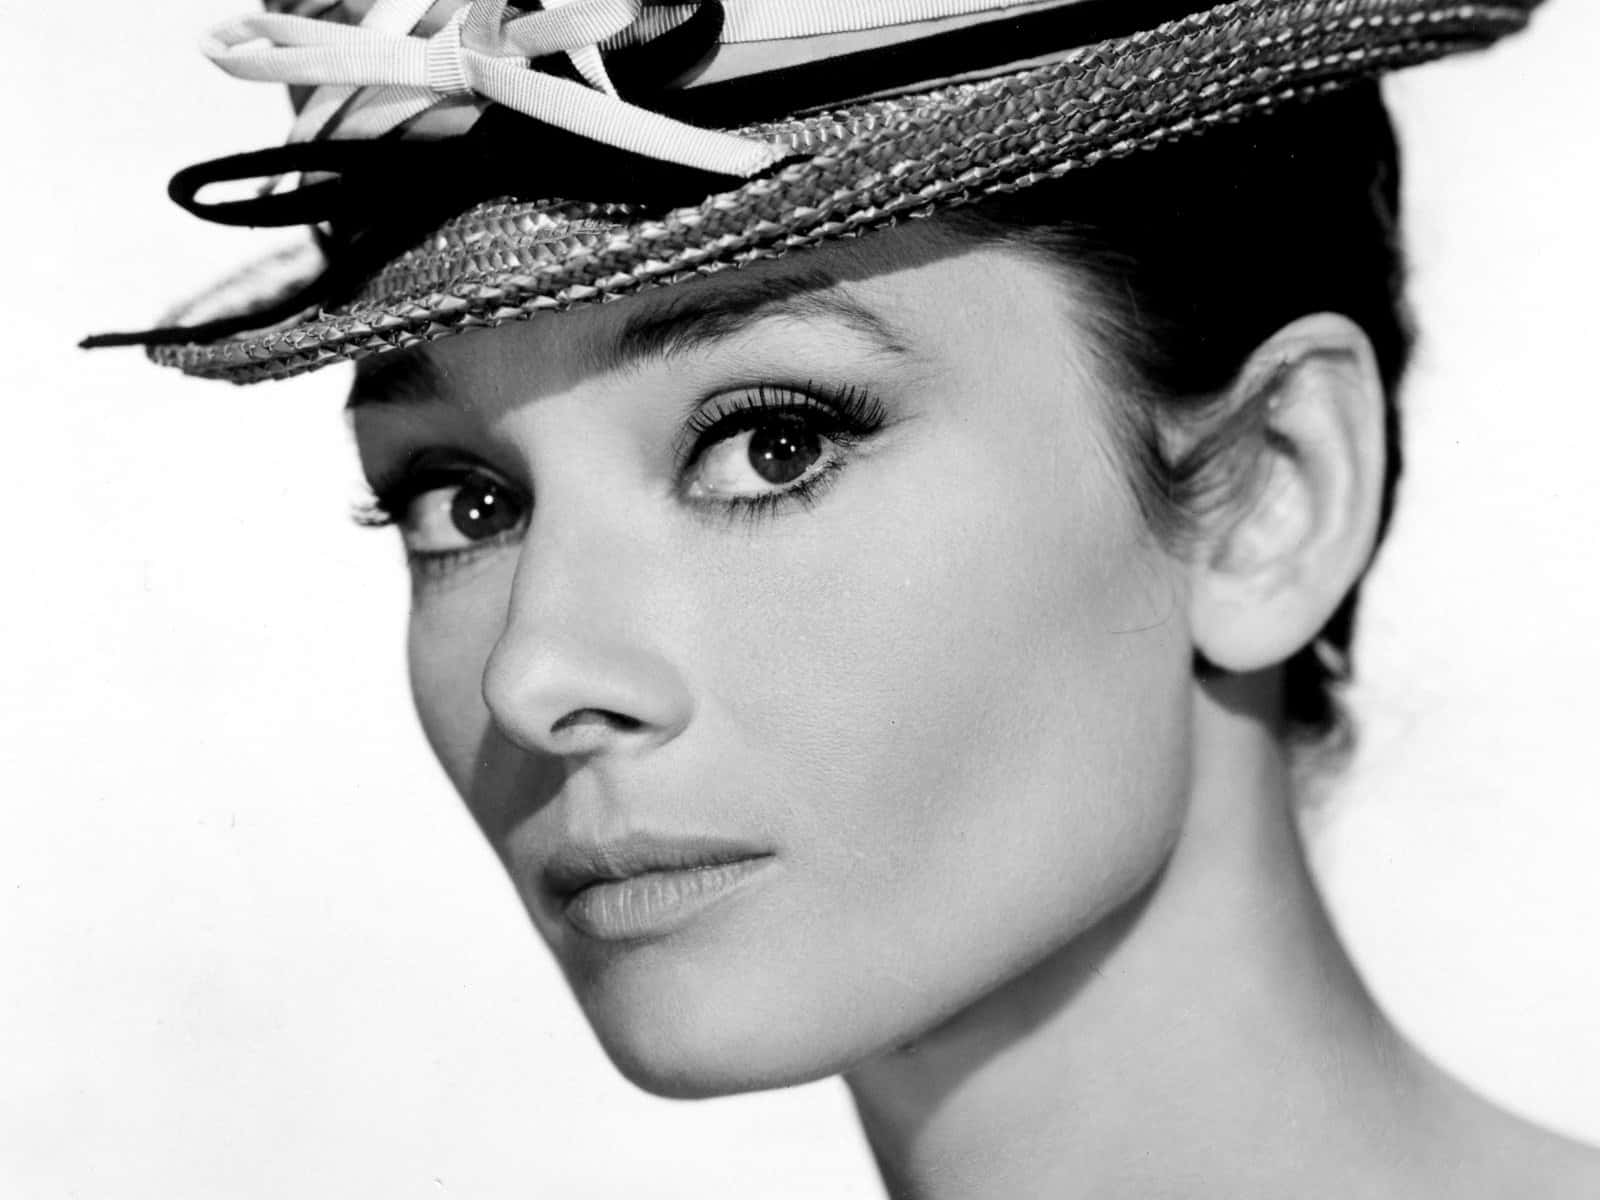 The classic and iconic Audrey Hepburn